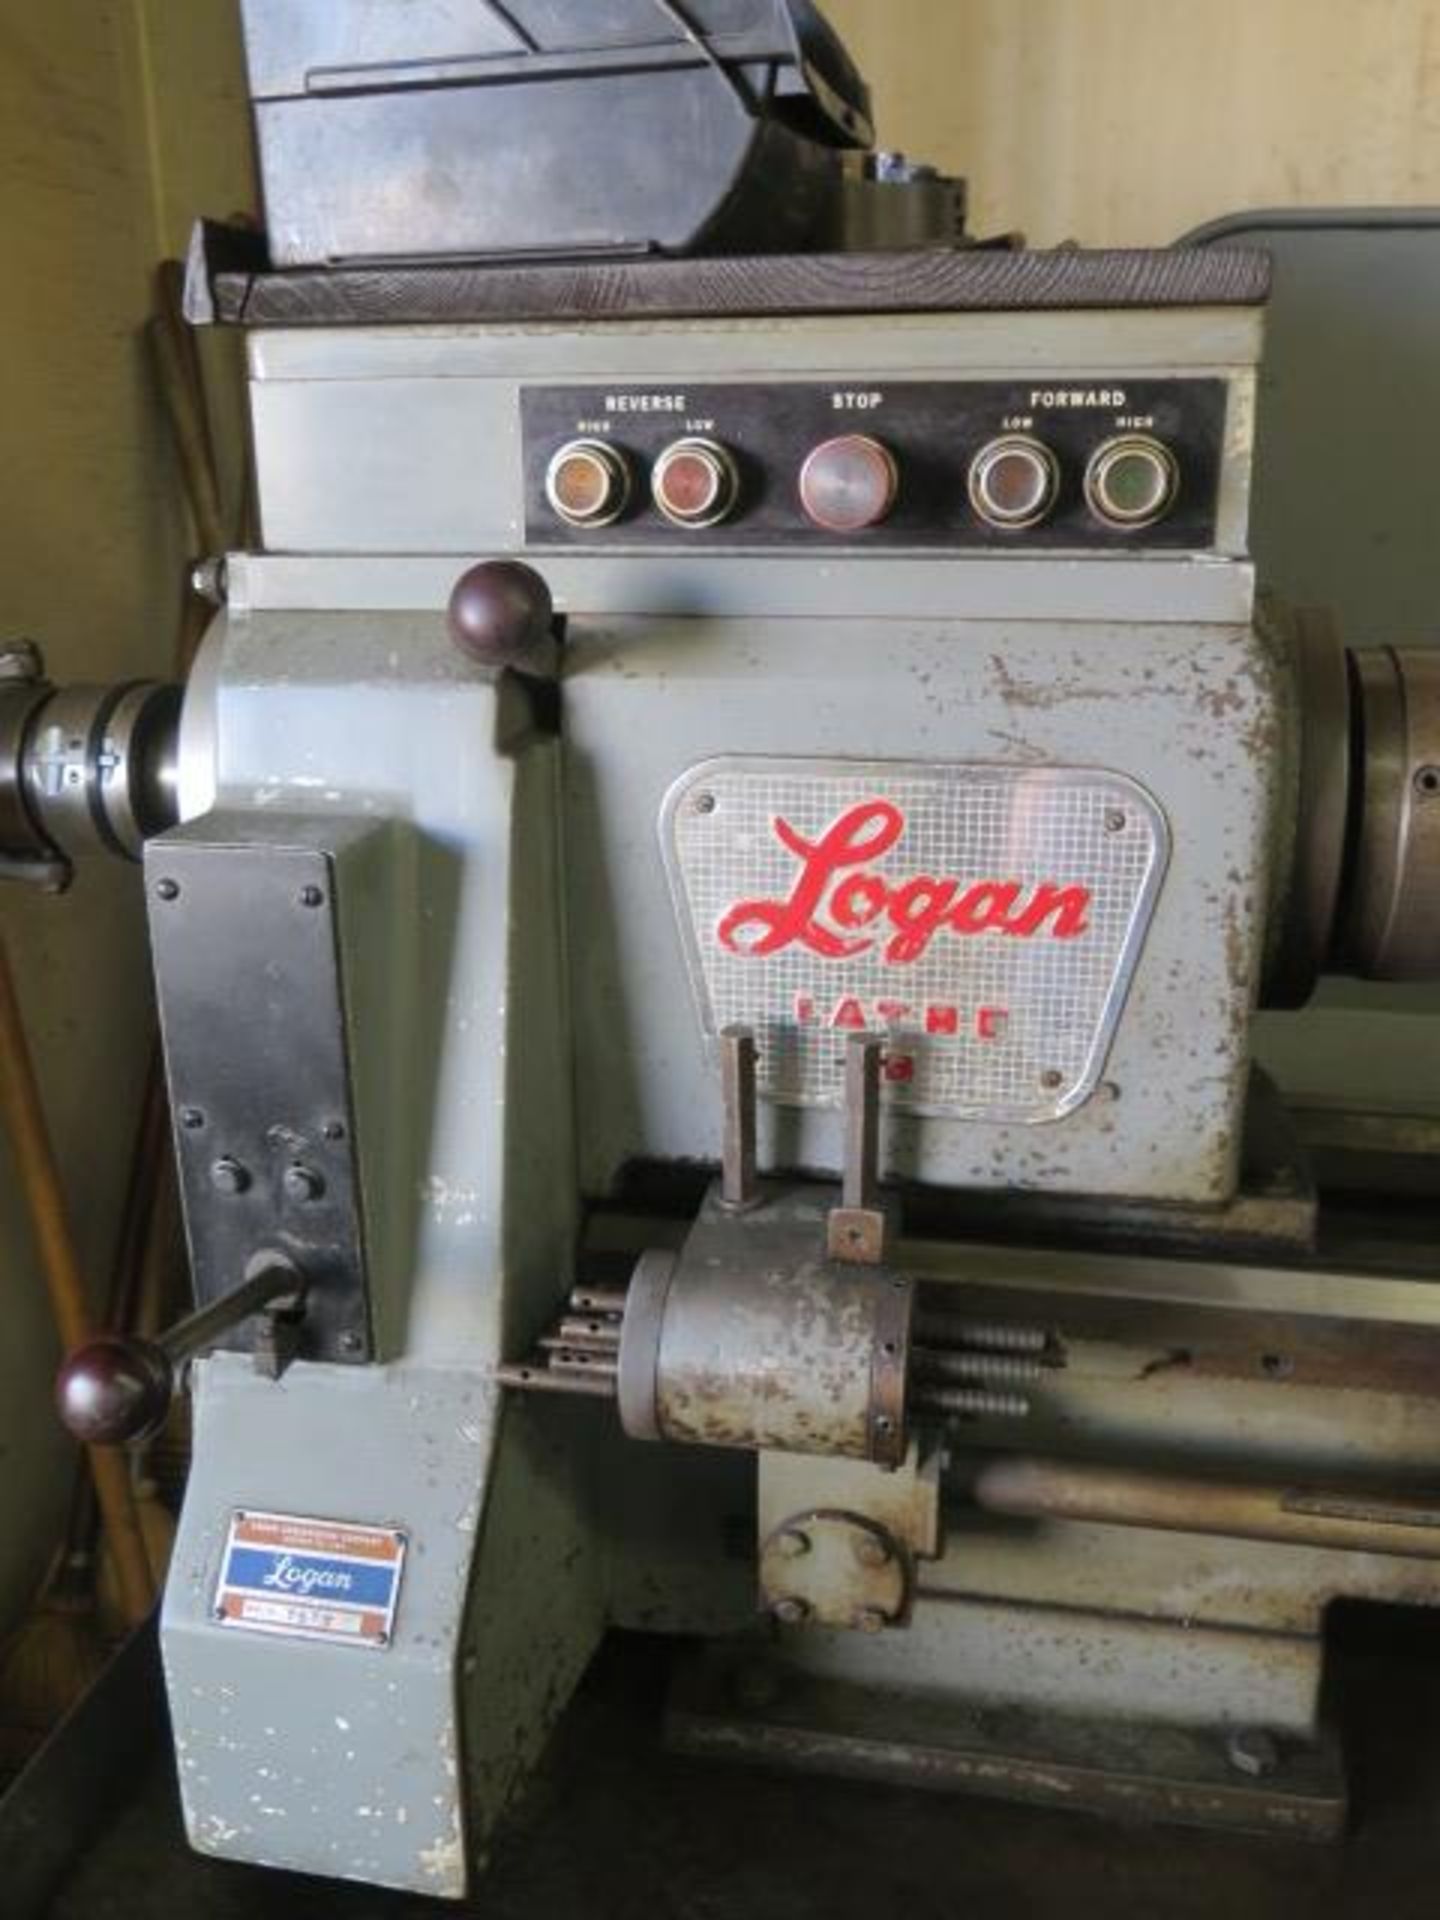 Logan mdl. 7515 Hand Chucker w/ 8-Station Turret, 350-2000 Adjustable RPM, 5C Spindle, SOLD AS IS - Image 4 of 10